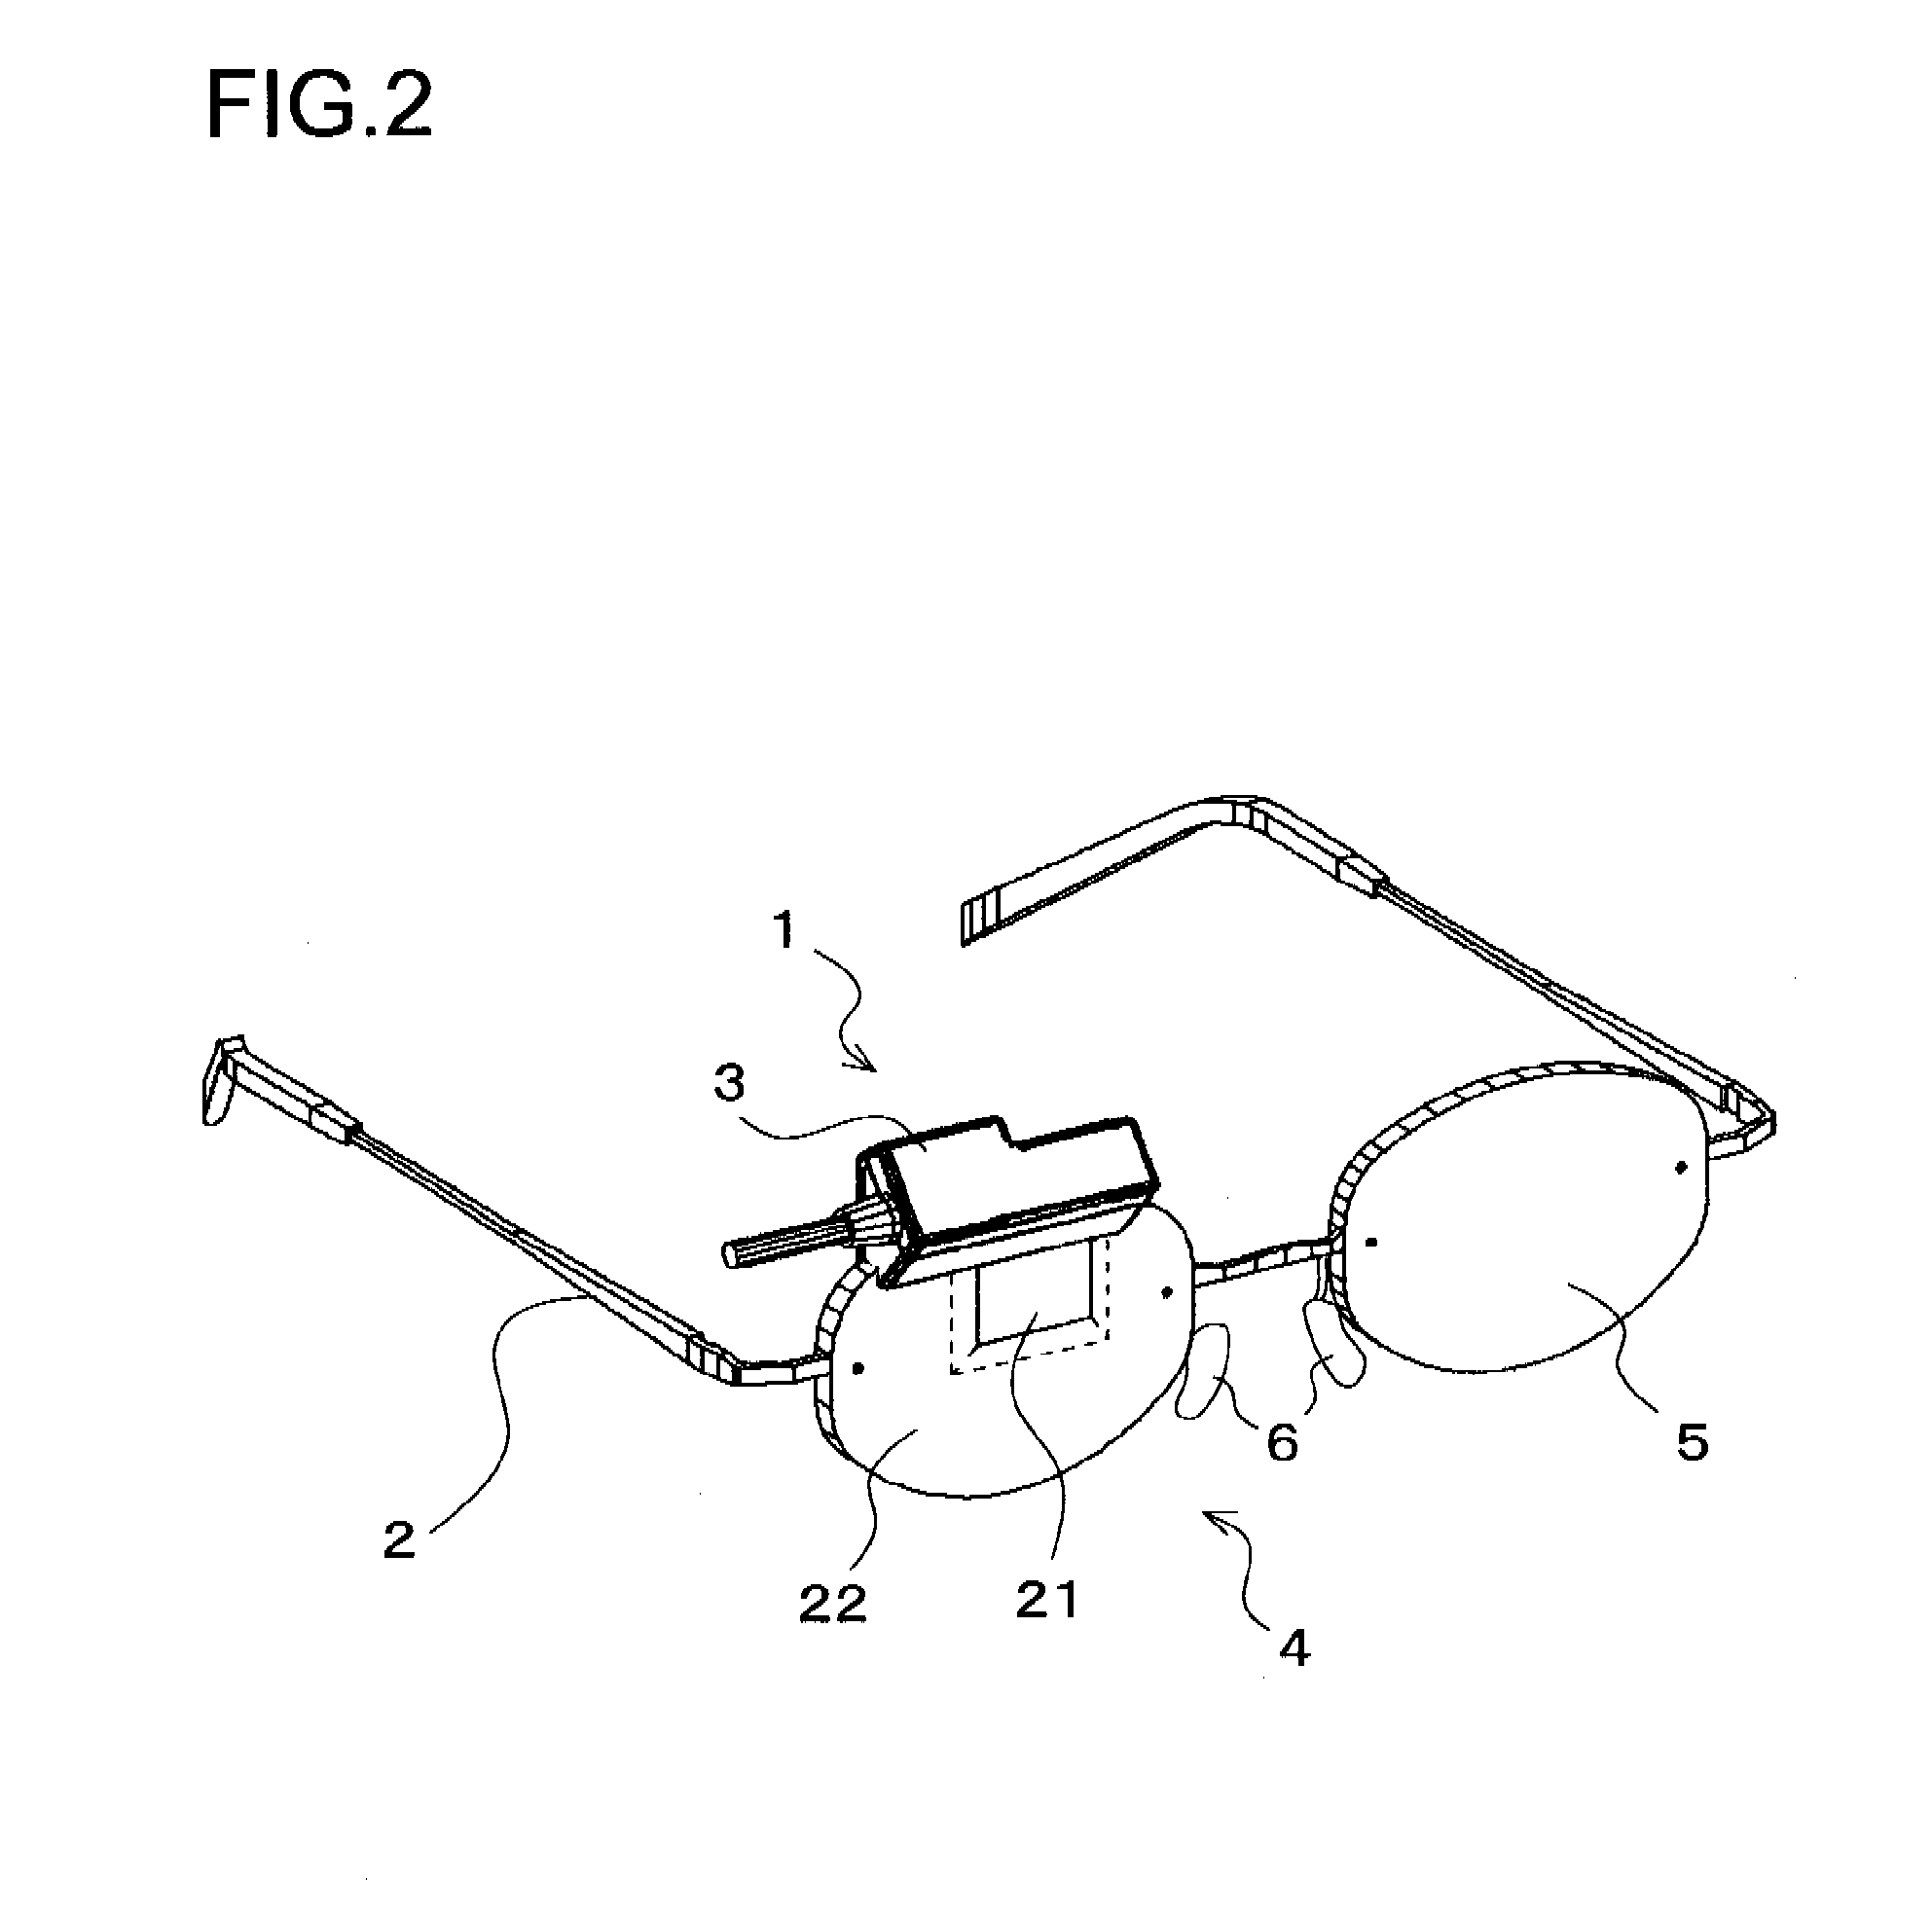 Hologram optical element, method of fabrication thereof, and image display apparatus